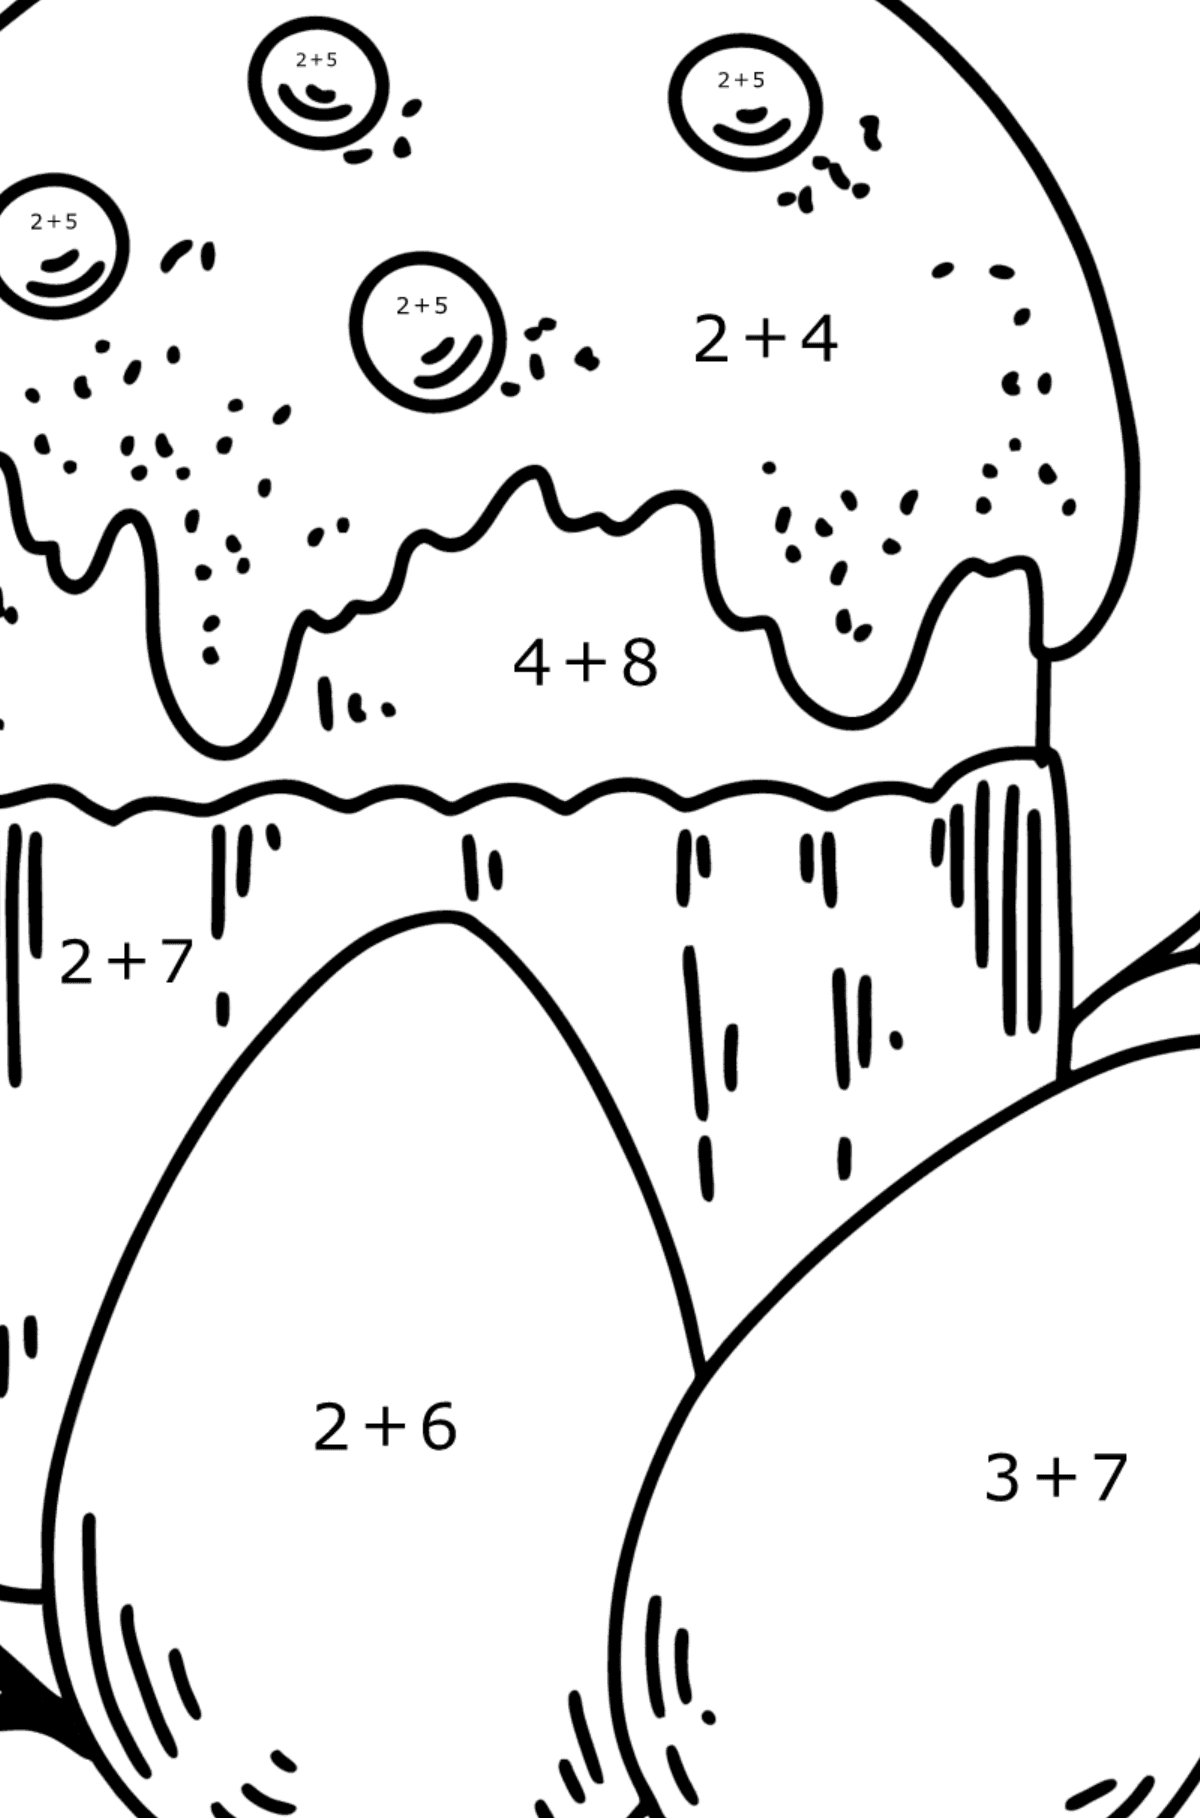 Coloring page - Easter cake and Painted Eggs - Math Coloring - Addition for Kids